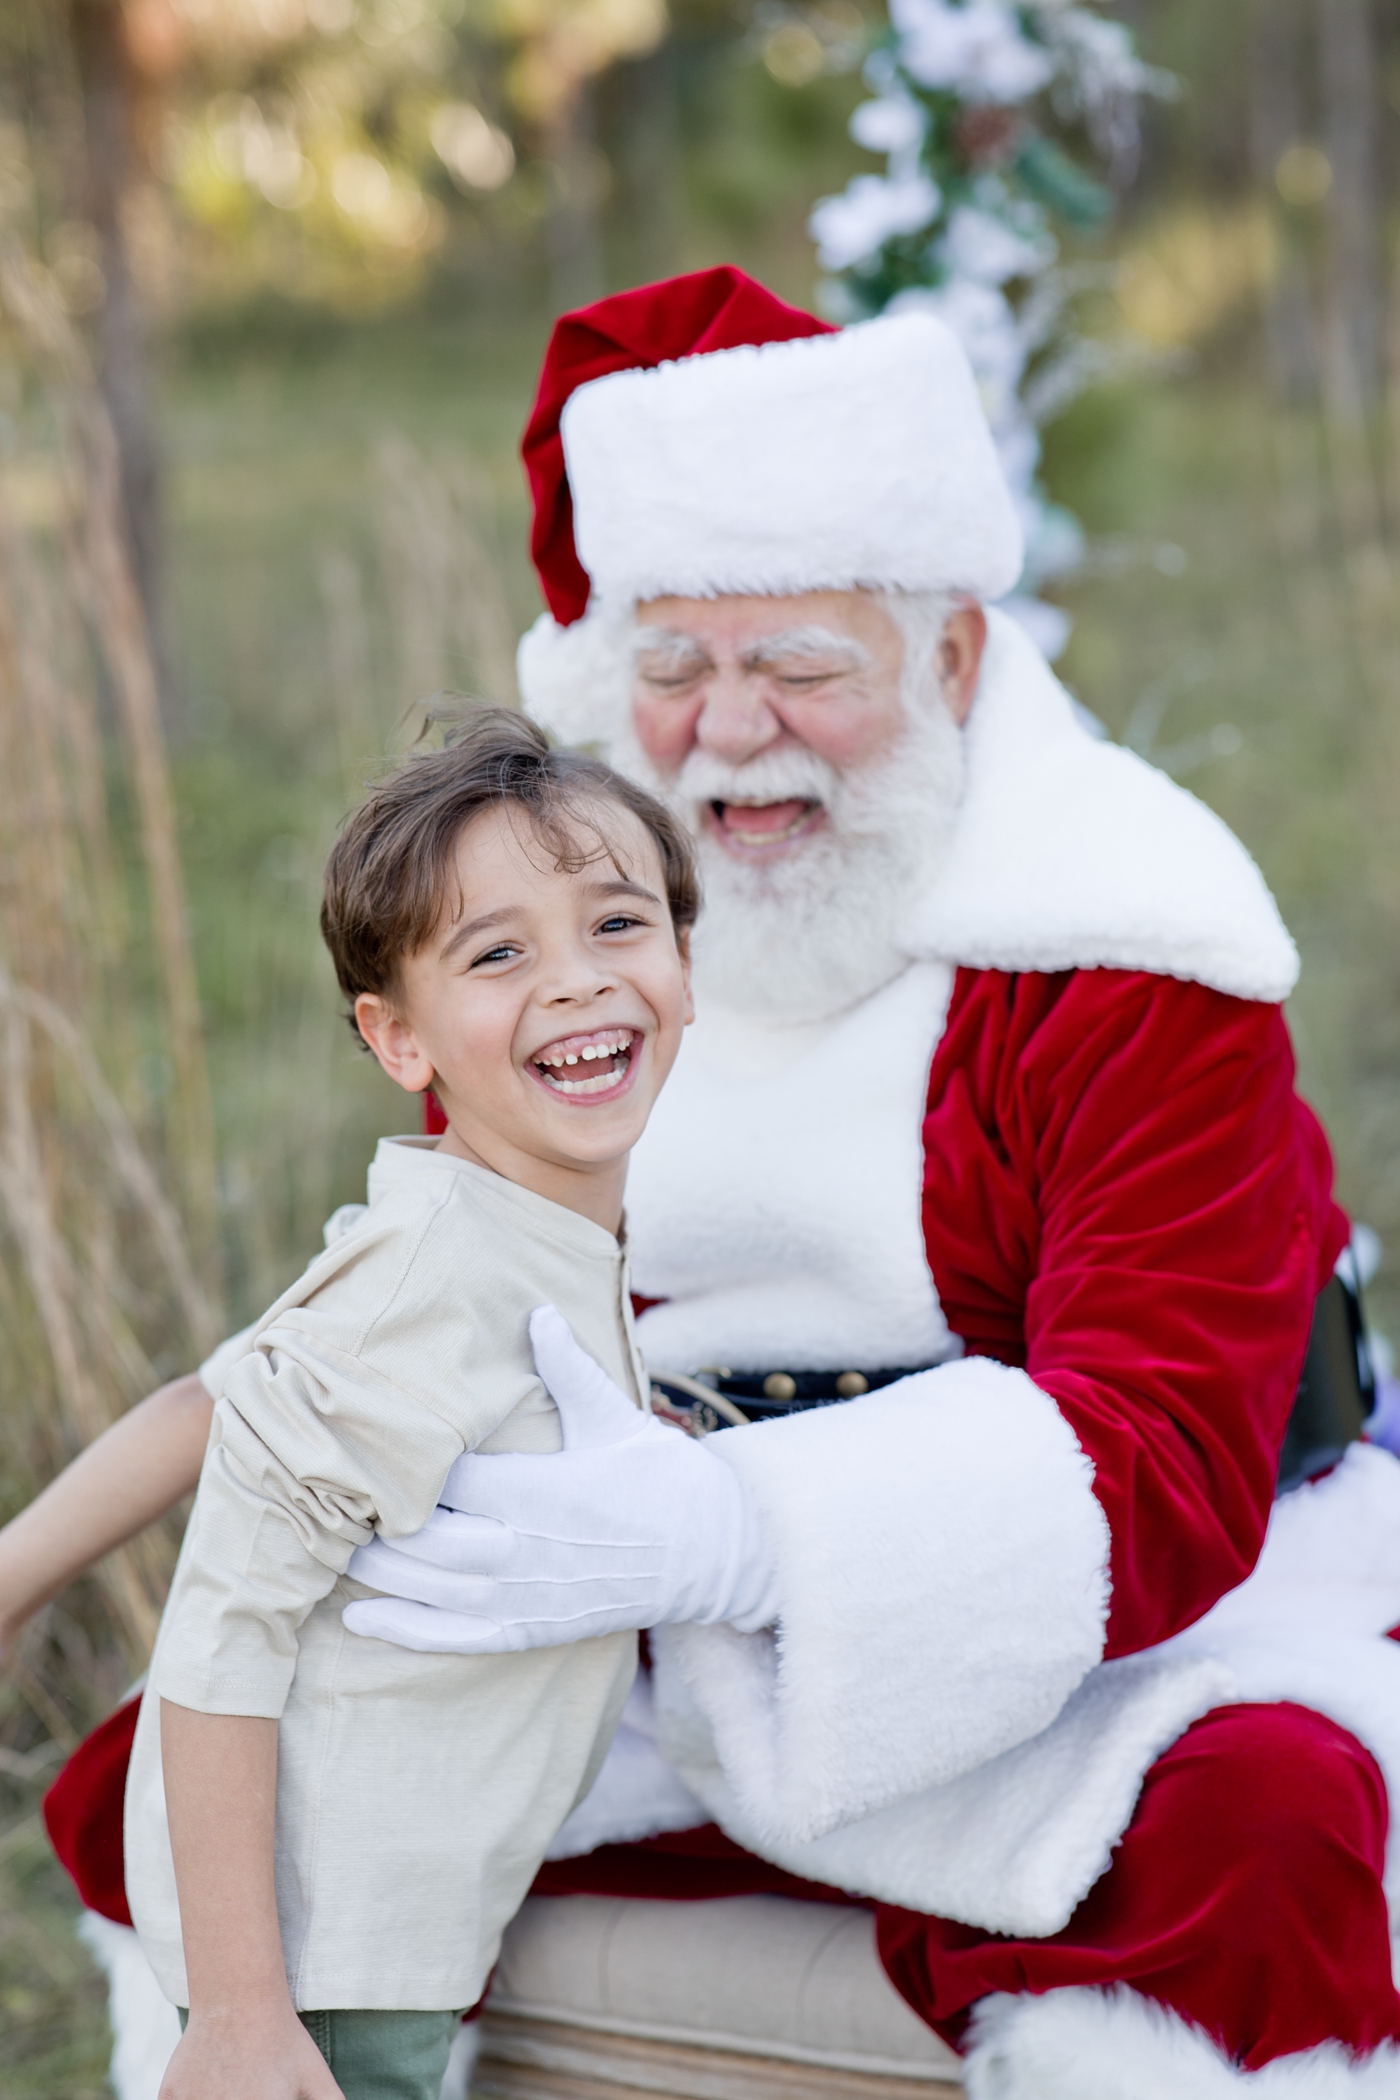 Santa and little boy laugh together. Photo by Ivanna Vidal Photography.